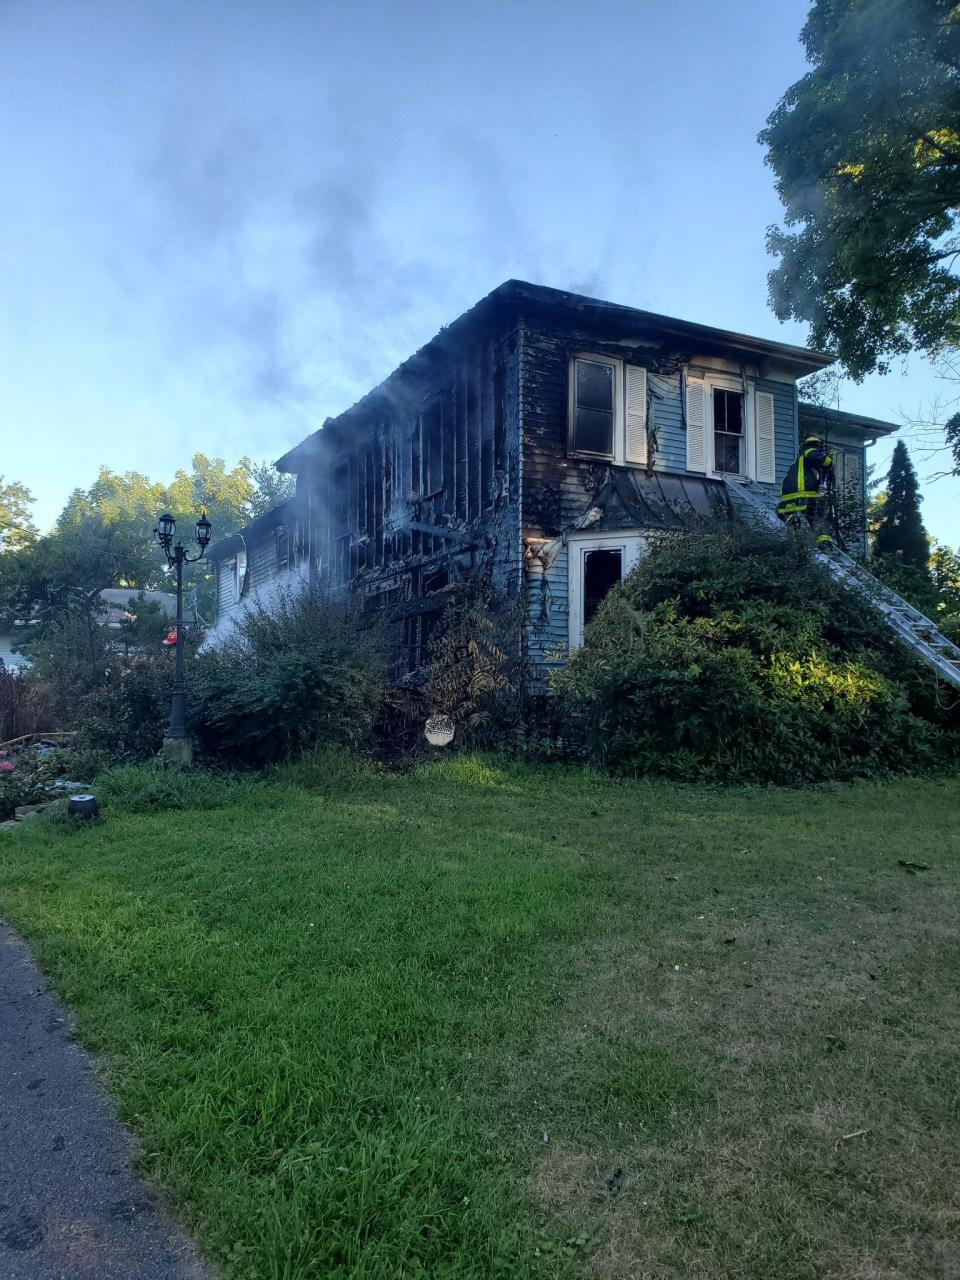 A fire early Saturday morning did heavy damage on the first and second floors of this Montville home, which is believed to be around 150 years old.